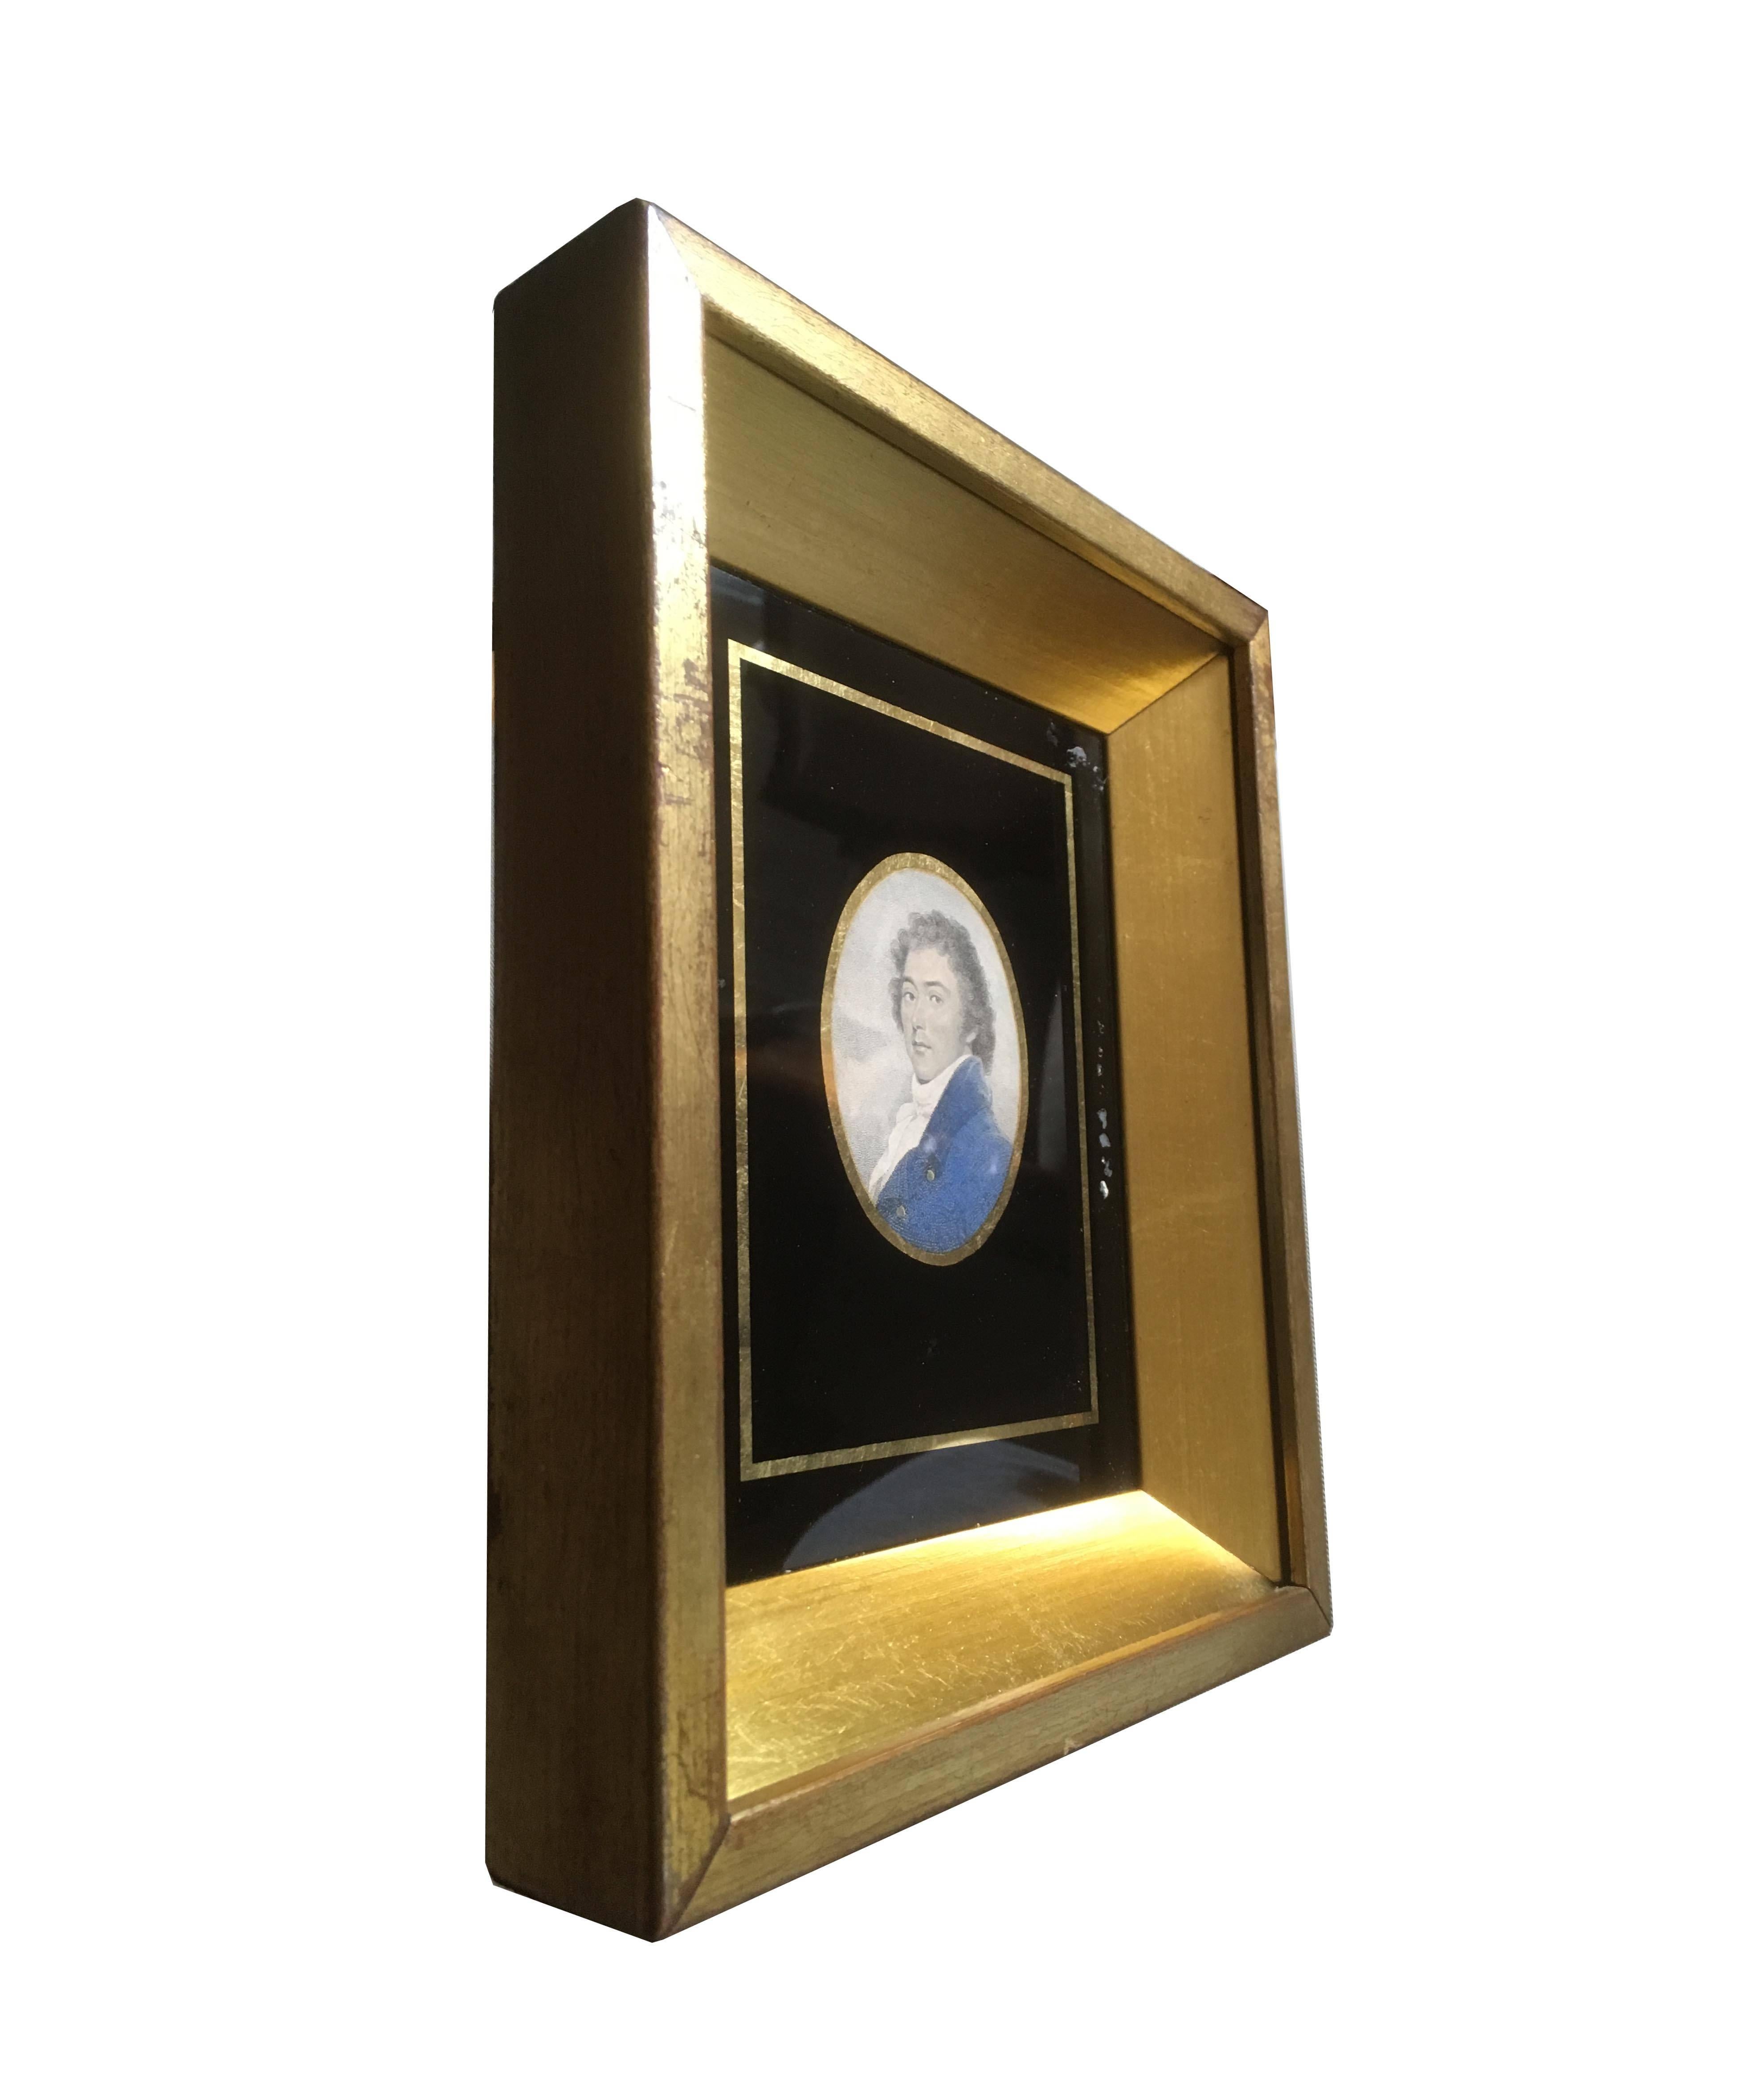 A fine portrait miniature of a man with long tousled hair and blue high-collared frock coat. The image is encased by parcel-gilt and black lacquered glass with a thick giltwood shadowbox frame, Continental Europe, circa 1815.